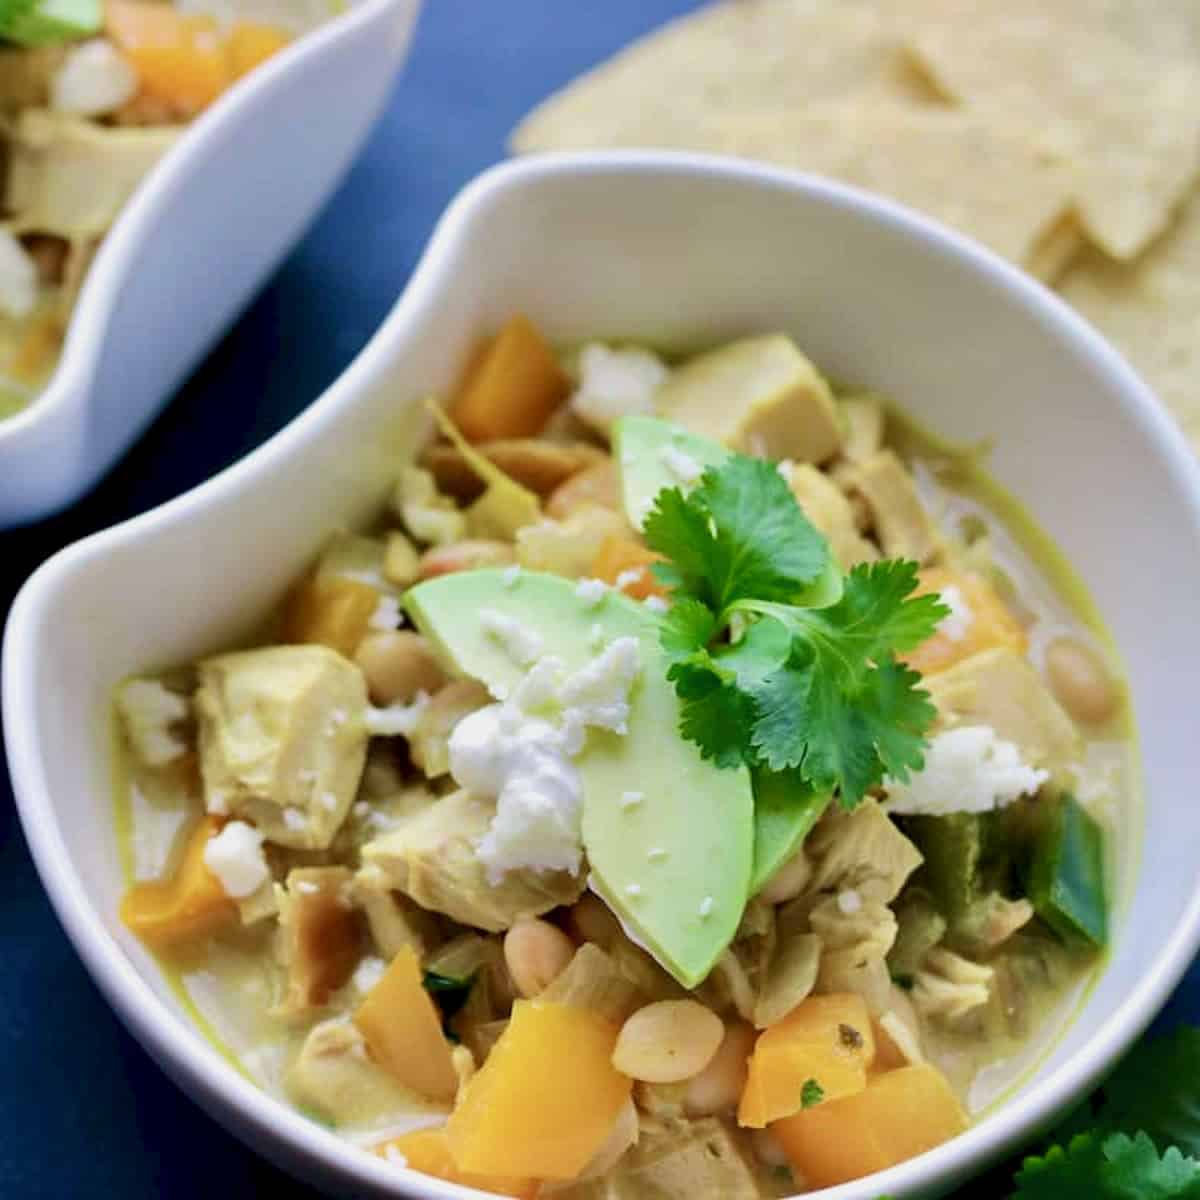 Bowl of Thai chicken chili topped with avocado and tortillas.